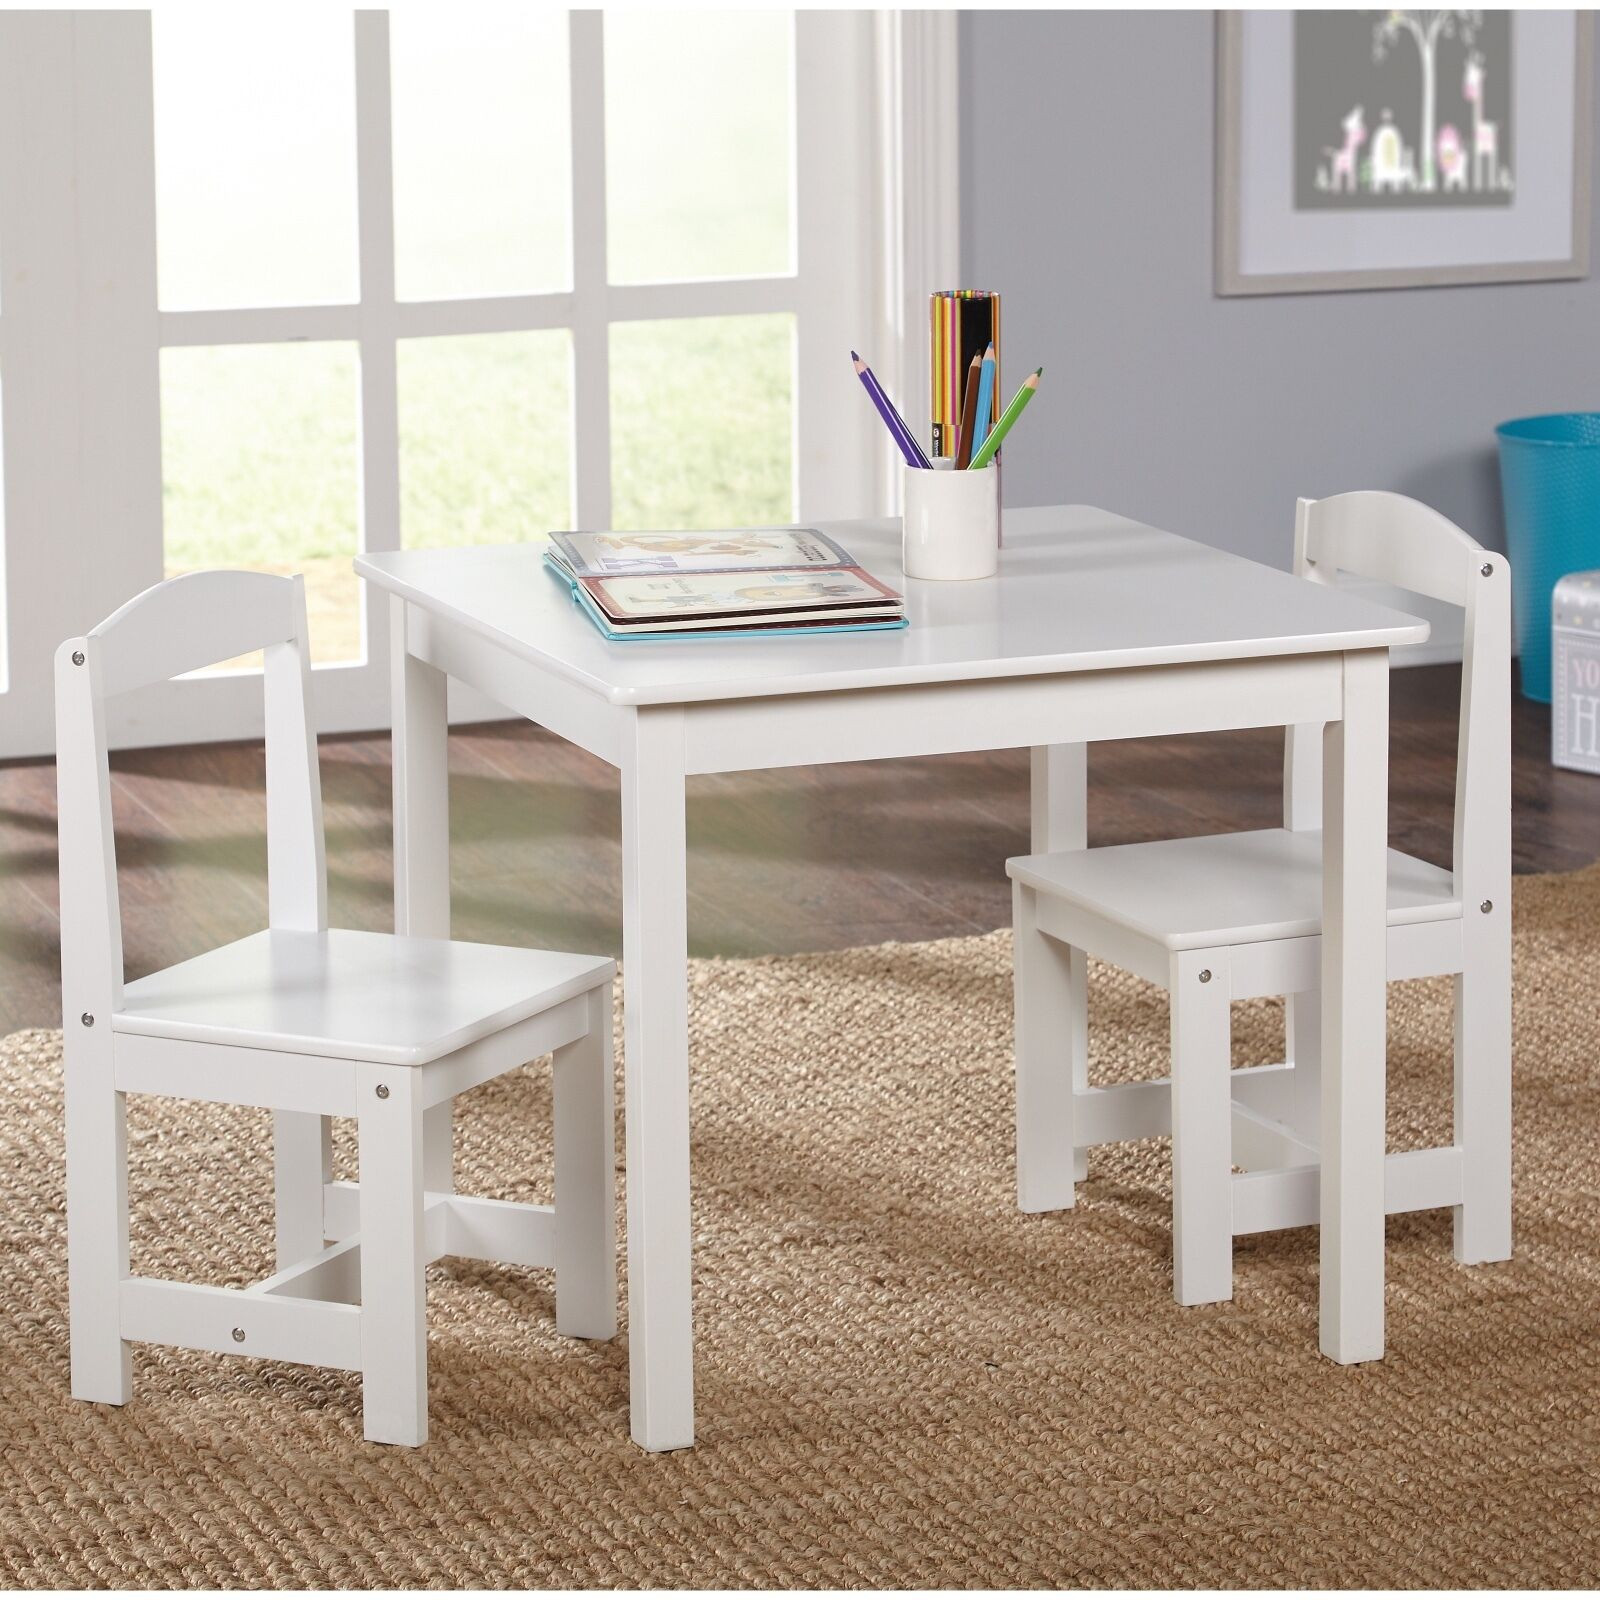 Kids Foldable Table And Chairs
 Study Small Table and Chair Set Generic 3 Piece Wood